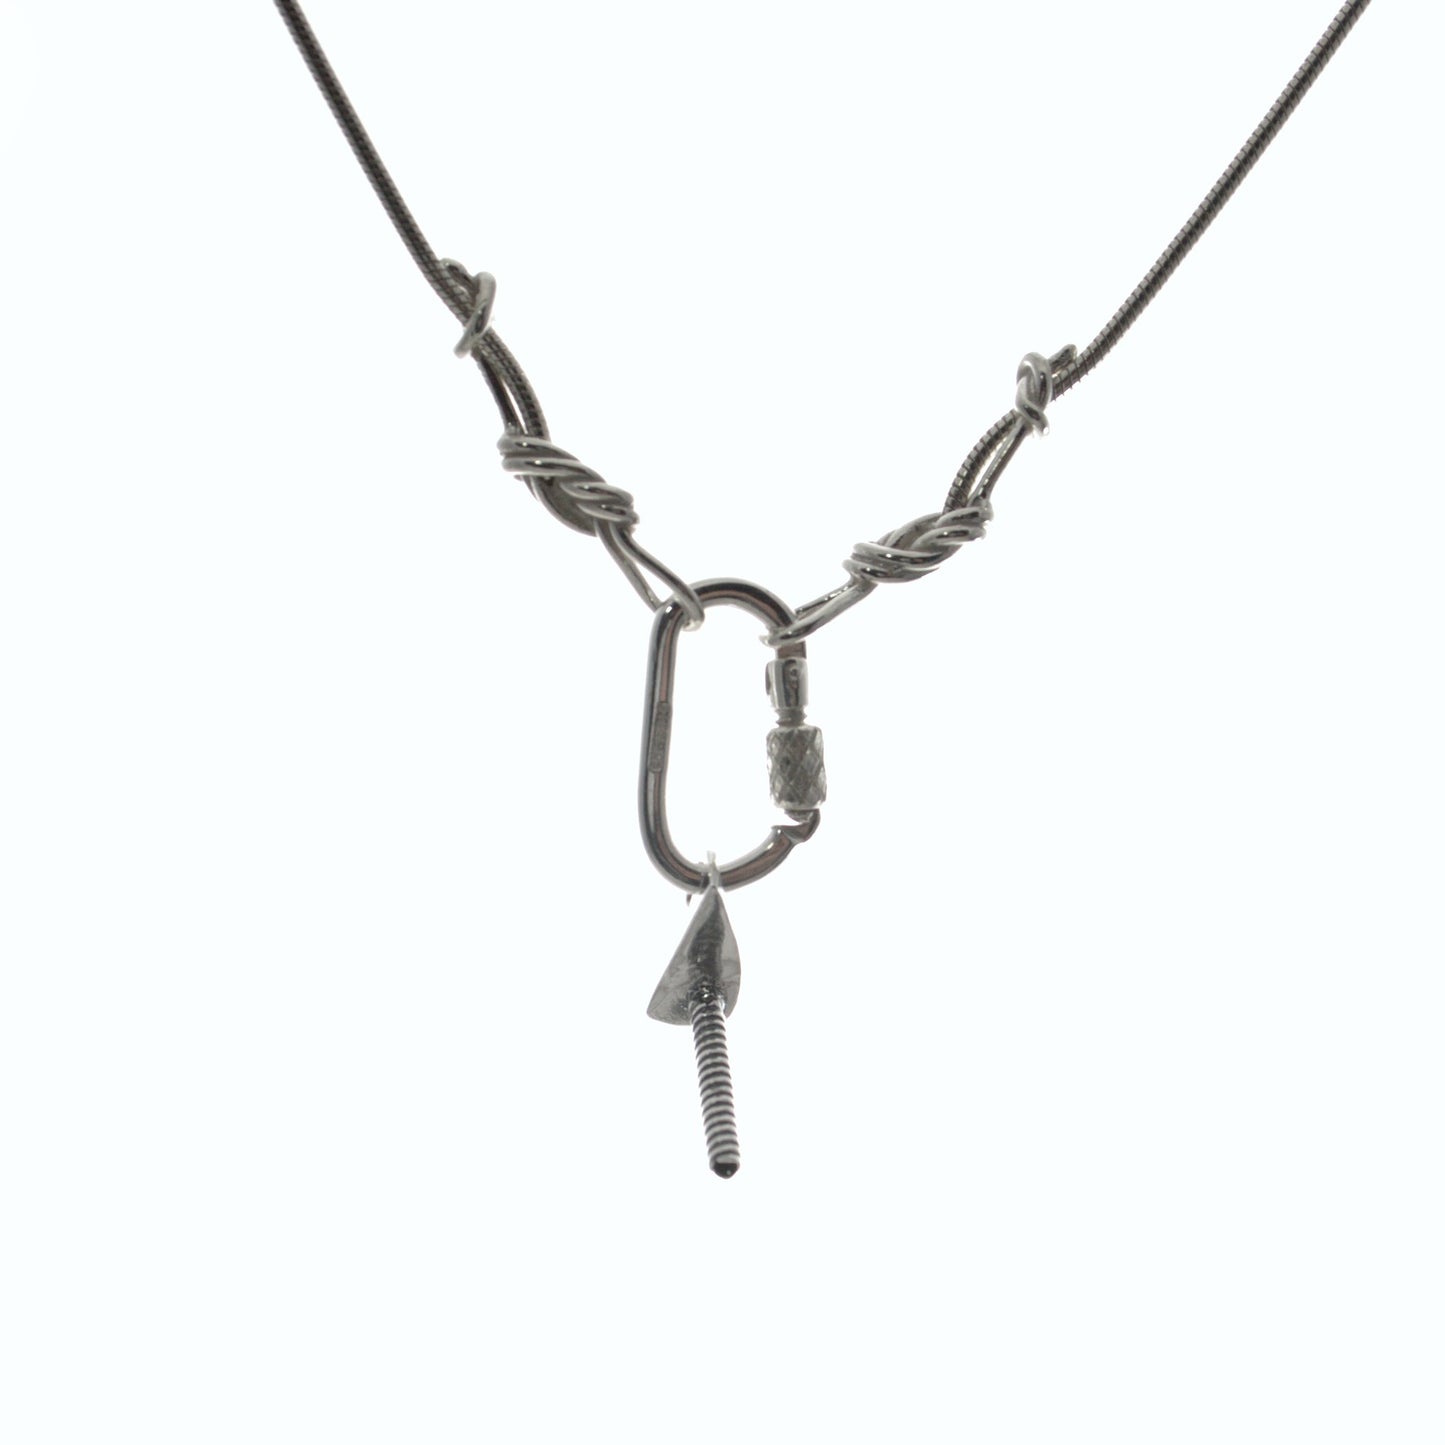 Climbing Rope Chain Necklace with Carabiner Clasp - Handmade in sterling silver and Ice Screw Pendant